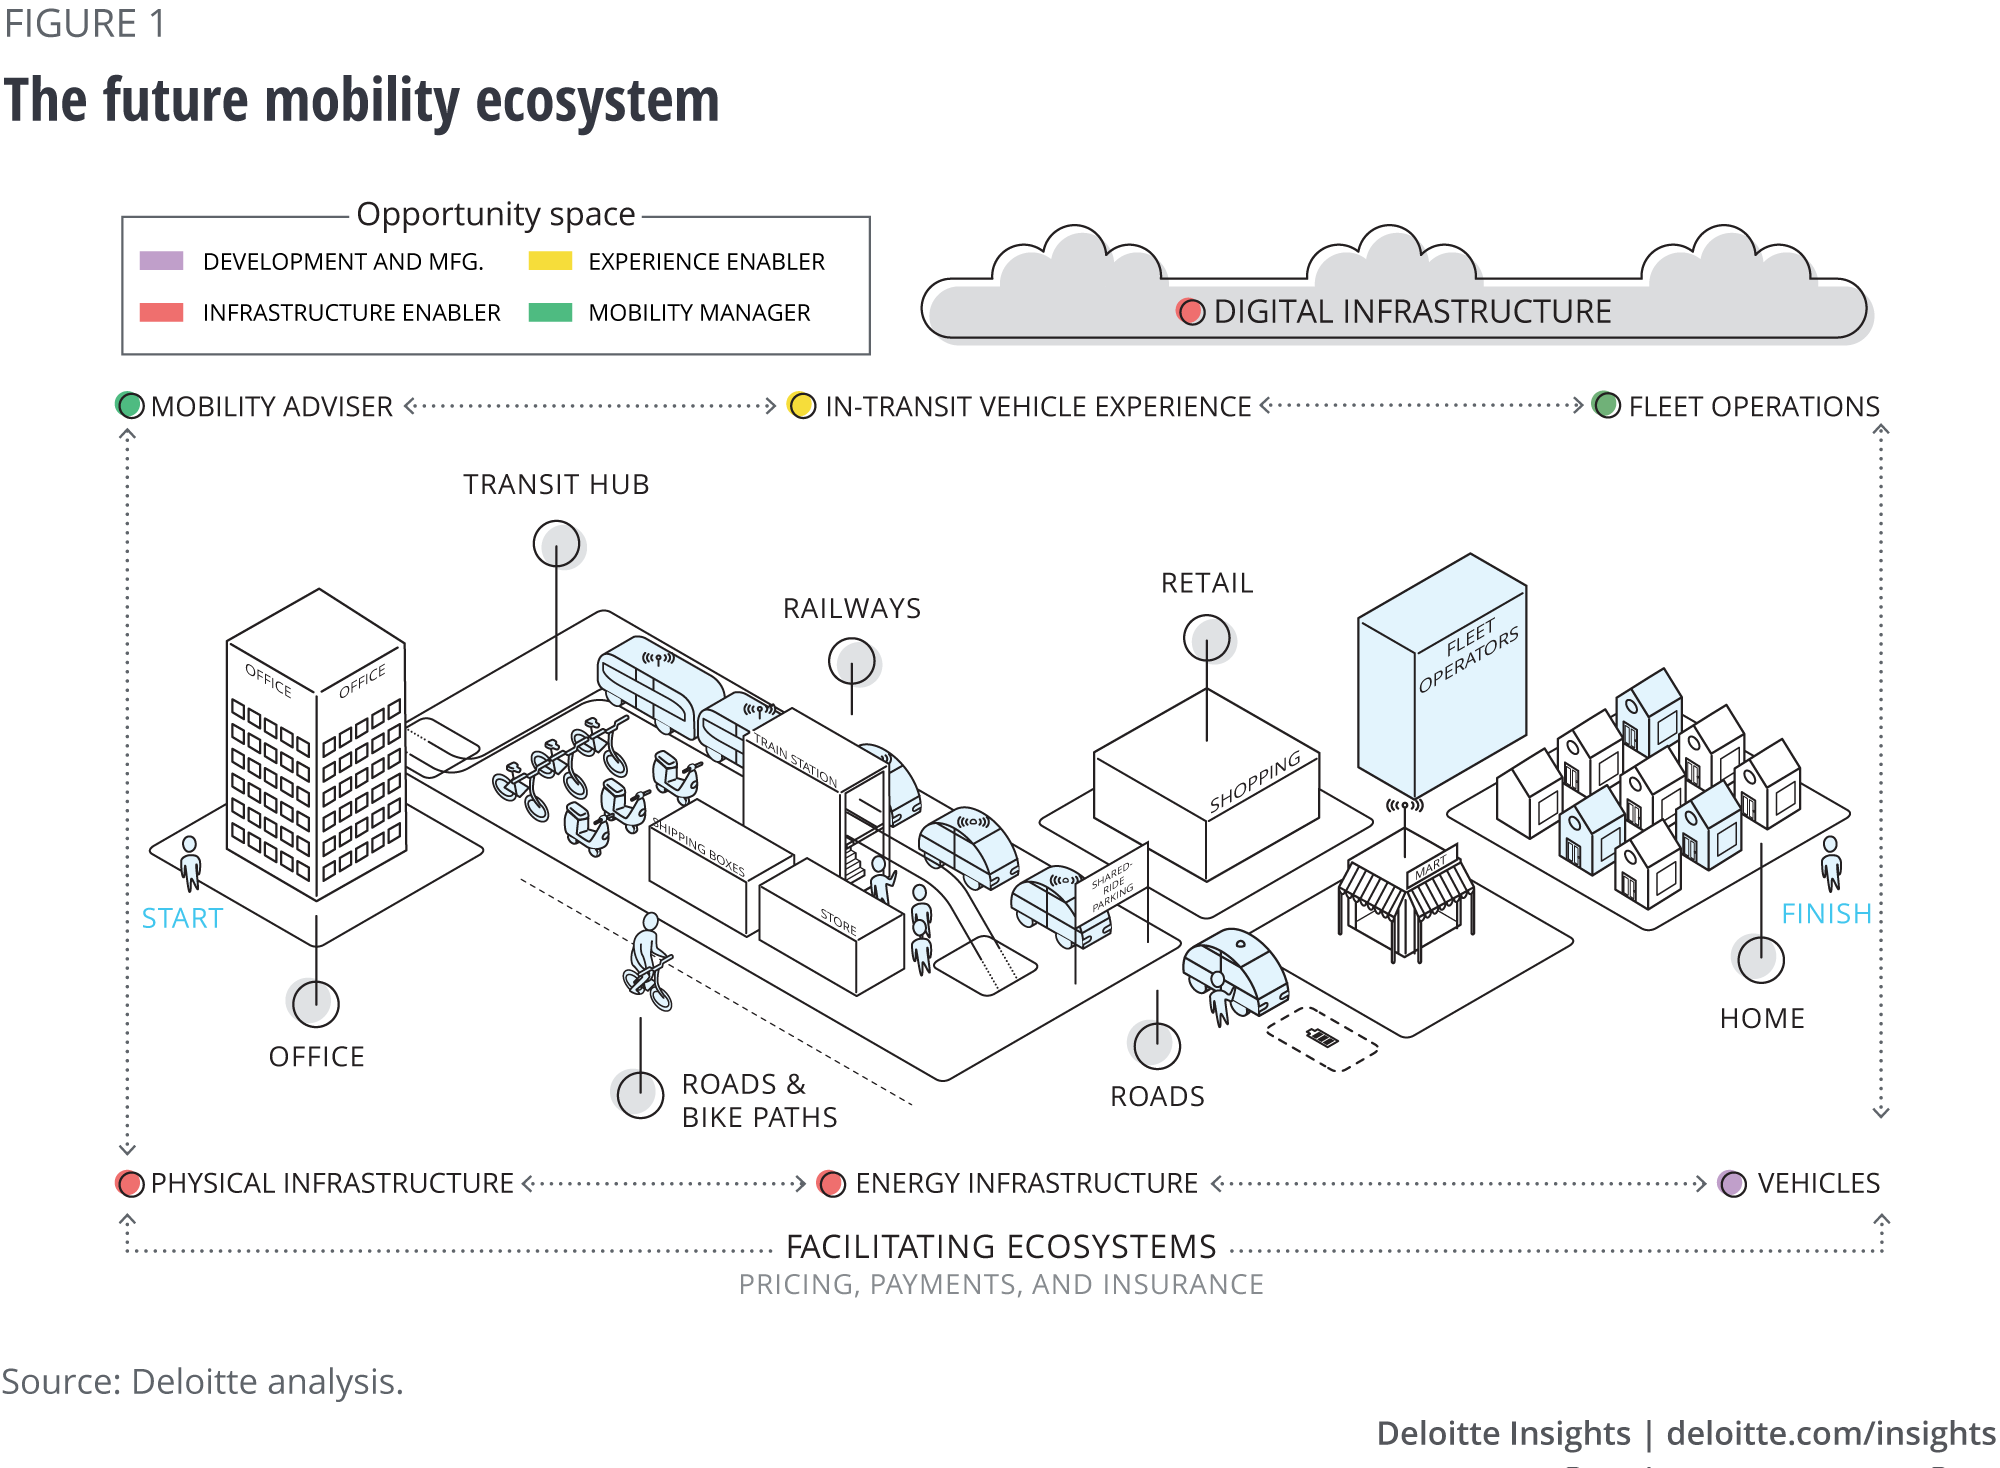 The future mobility ecosystem